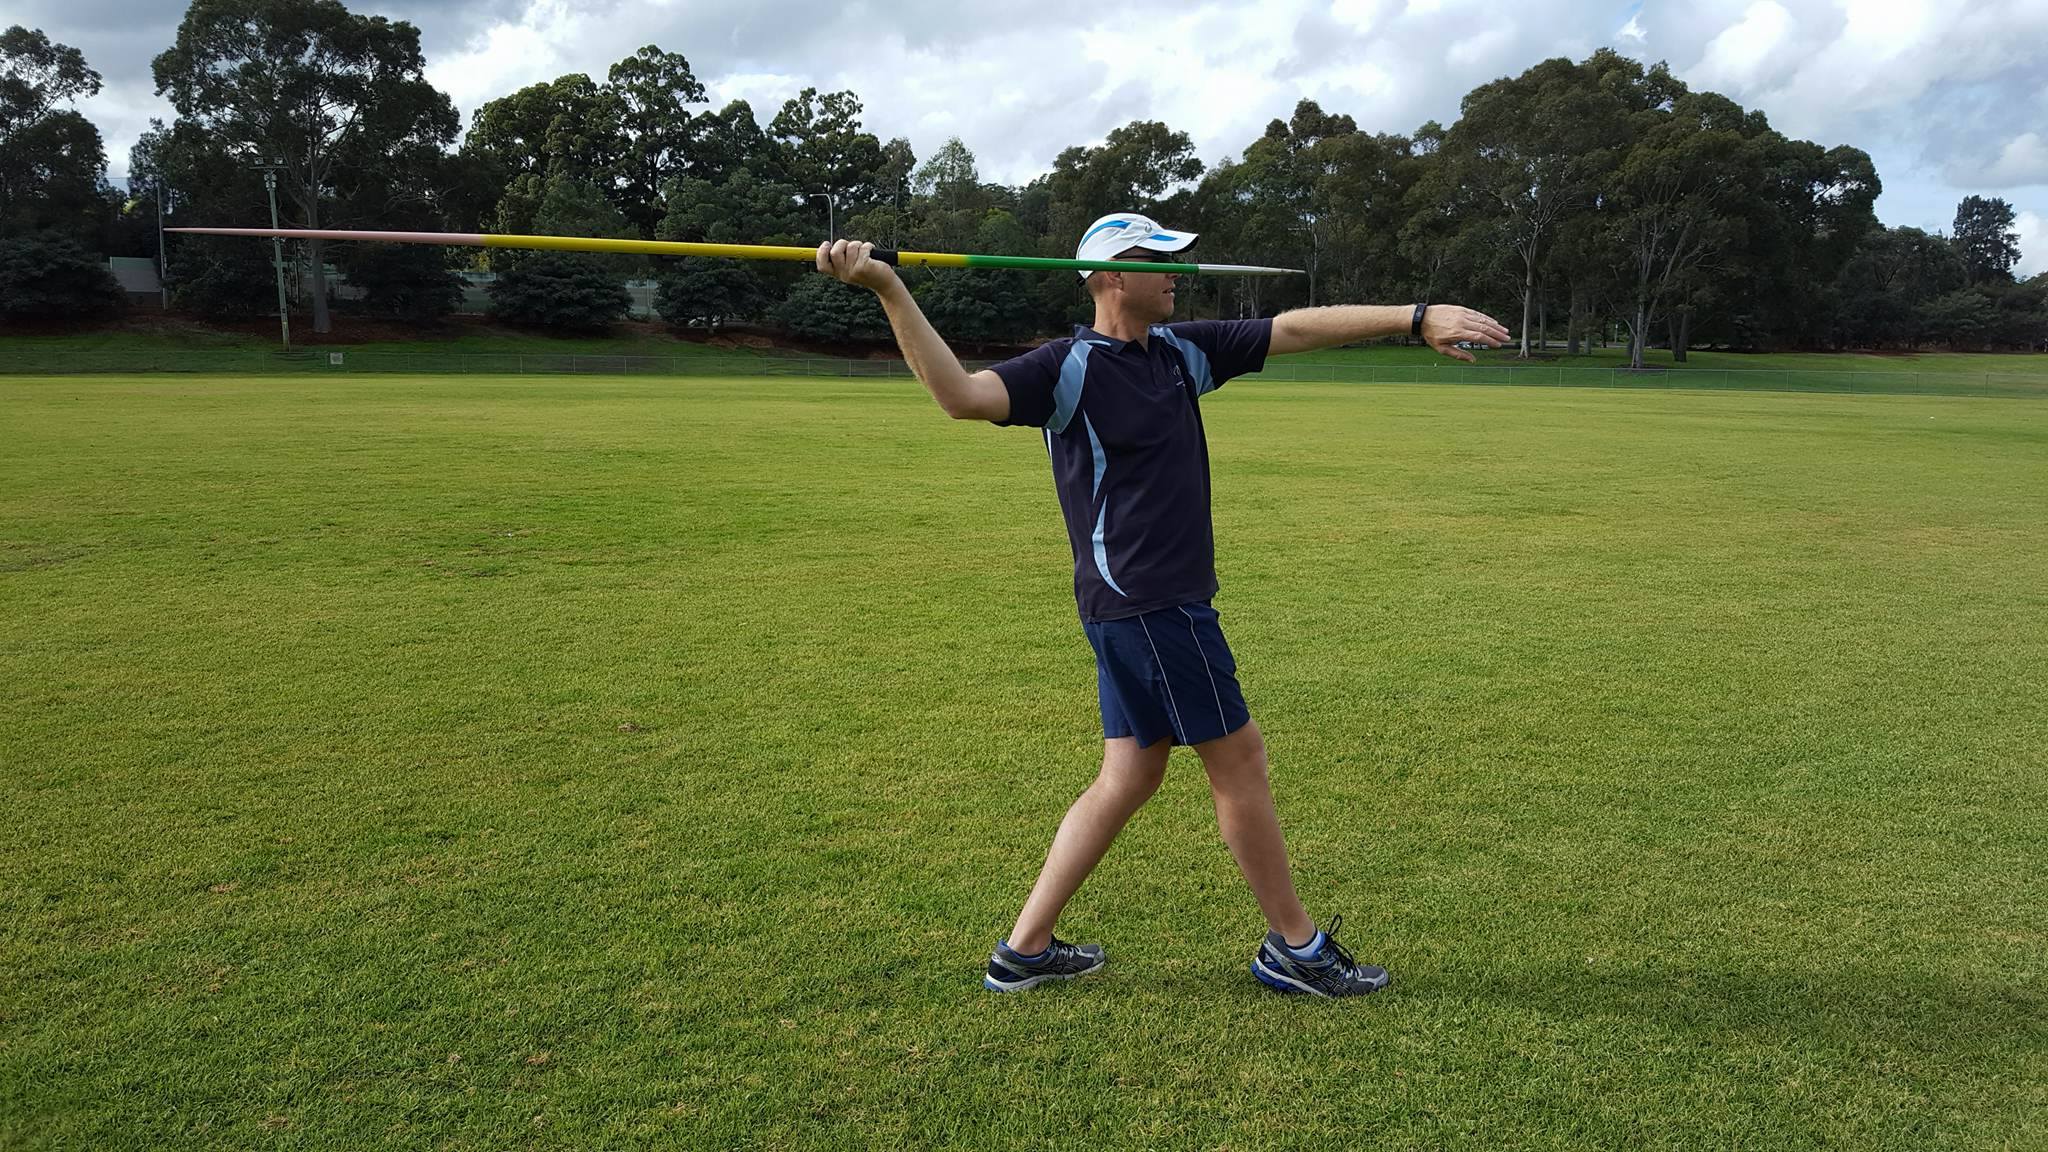 Right-handed javelin thrower standing with right foot forward - side view